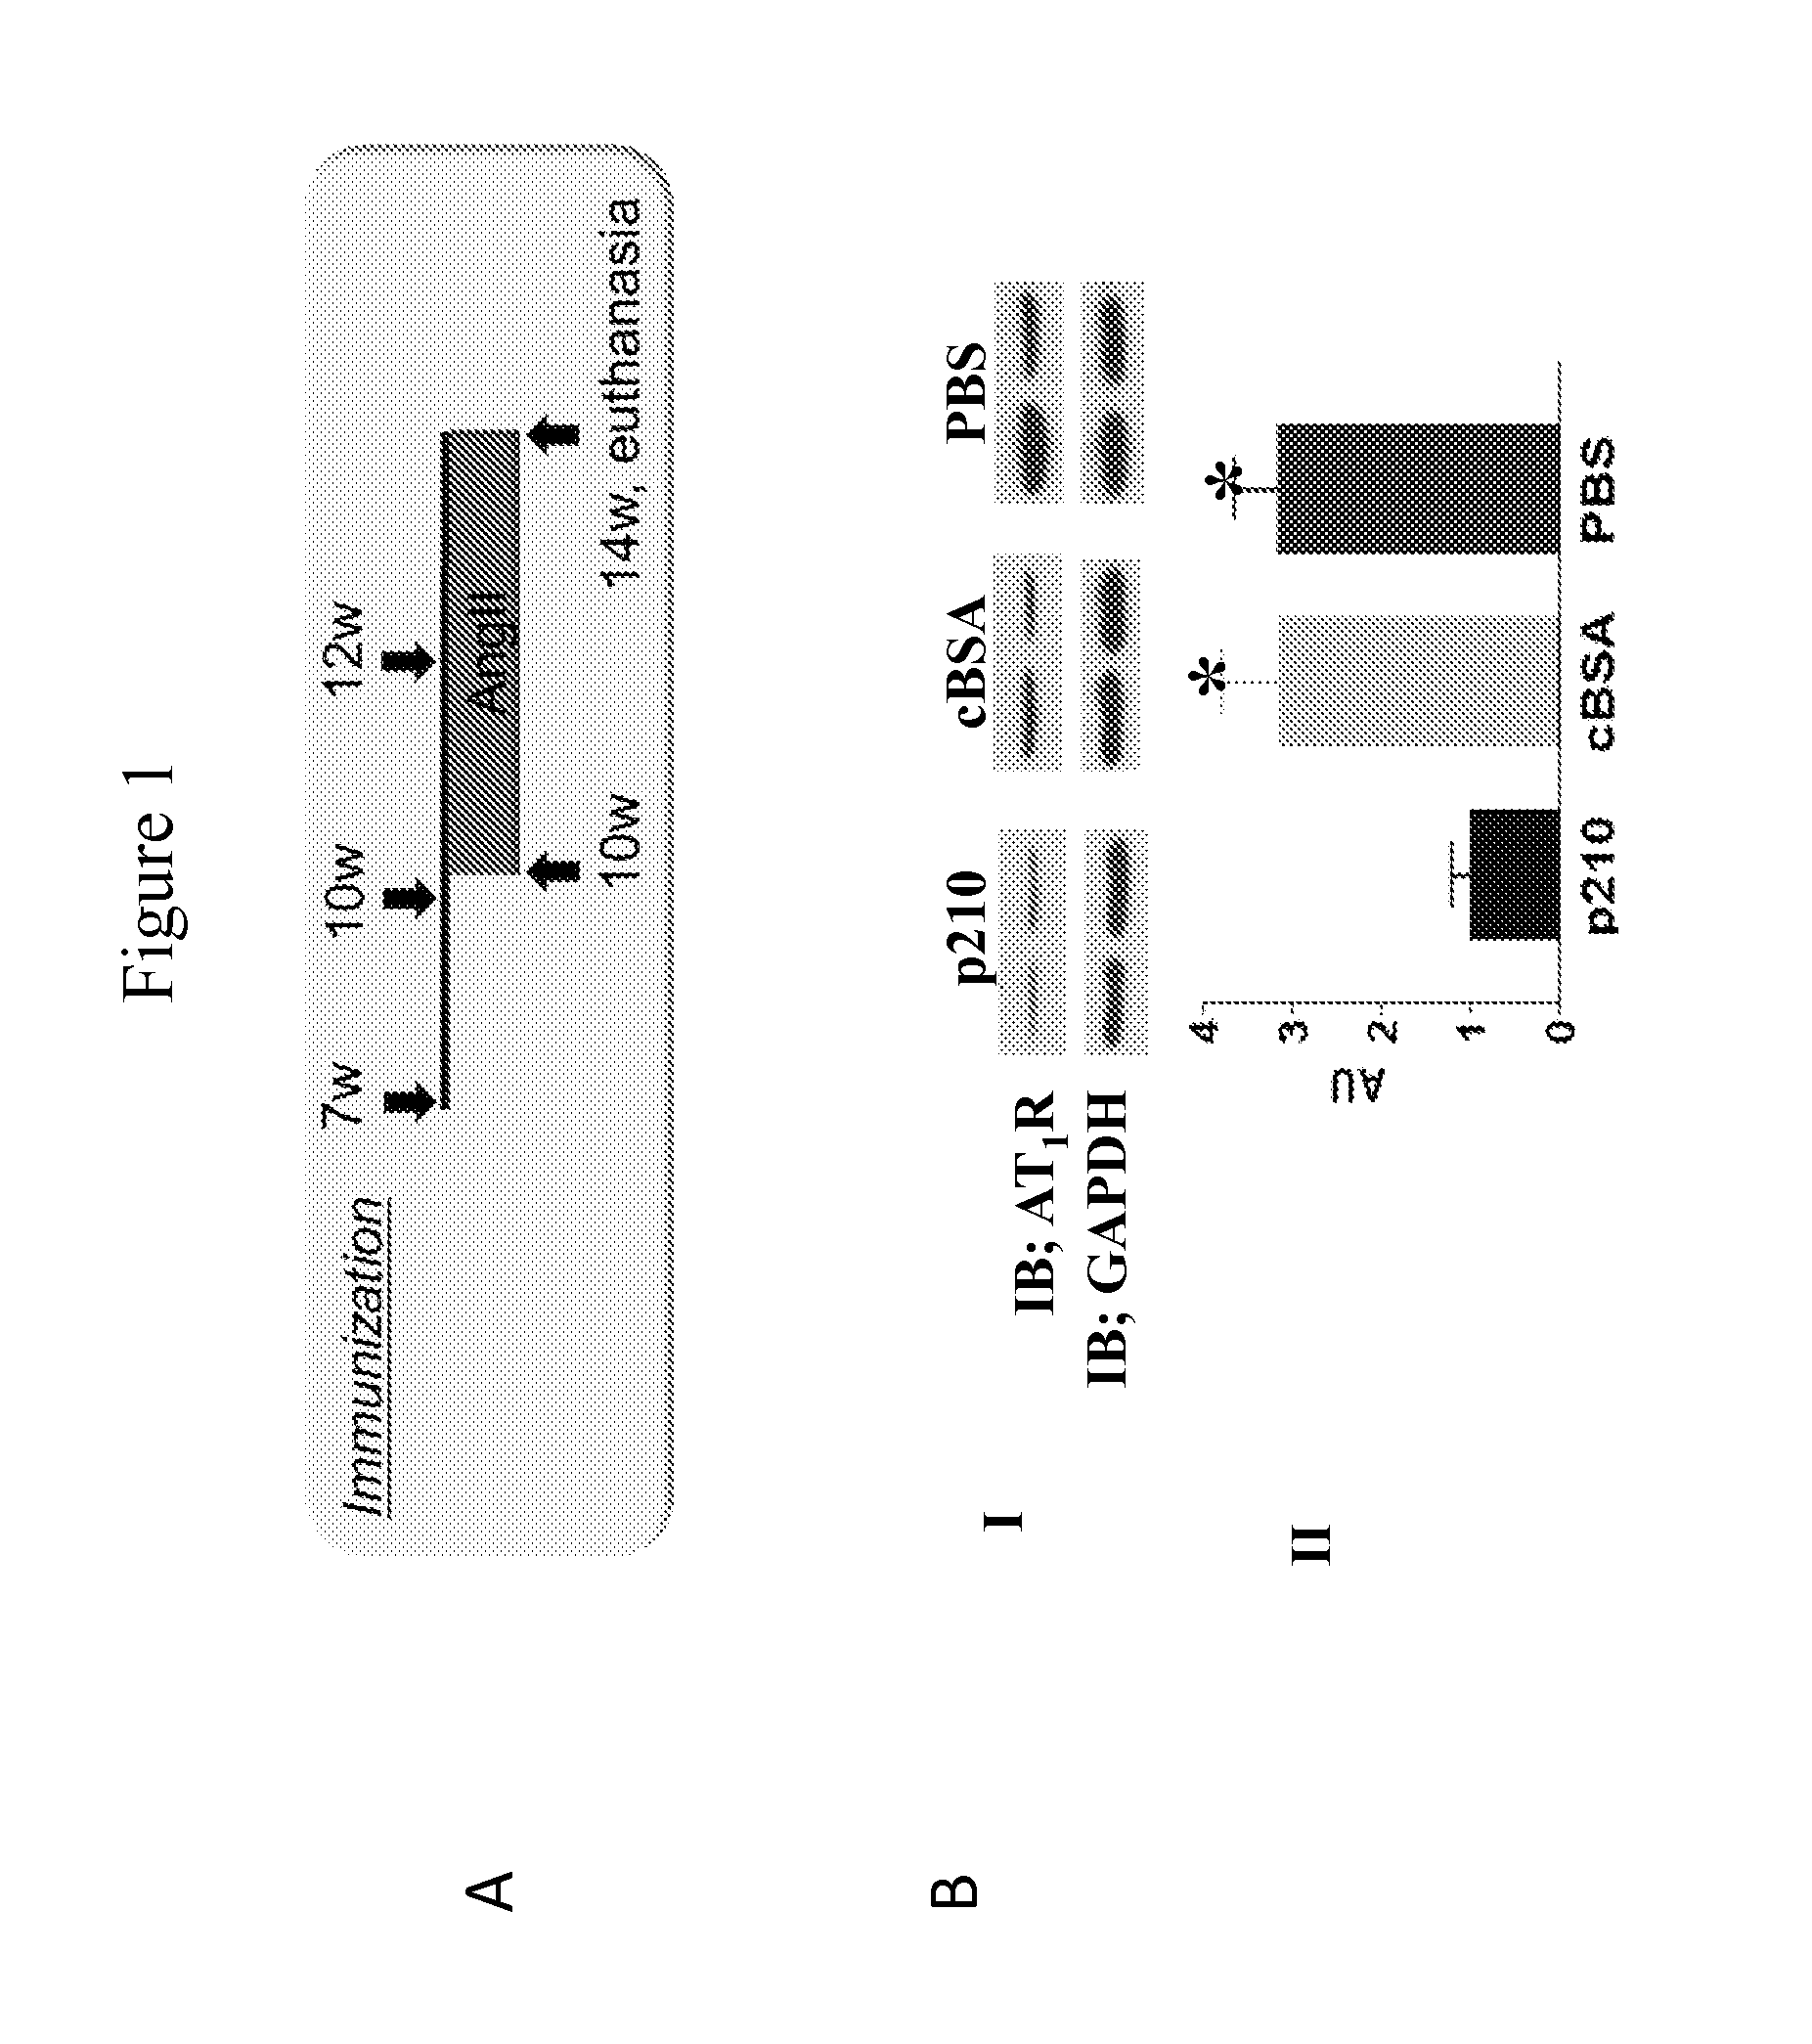 Methods for treating kidney disease with fragments of ApoB-100